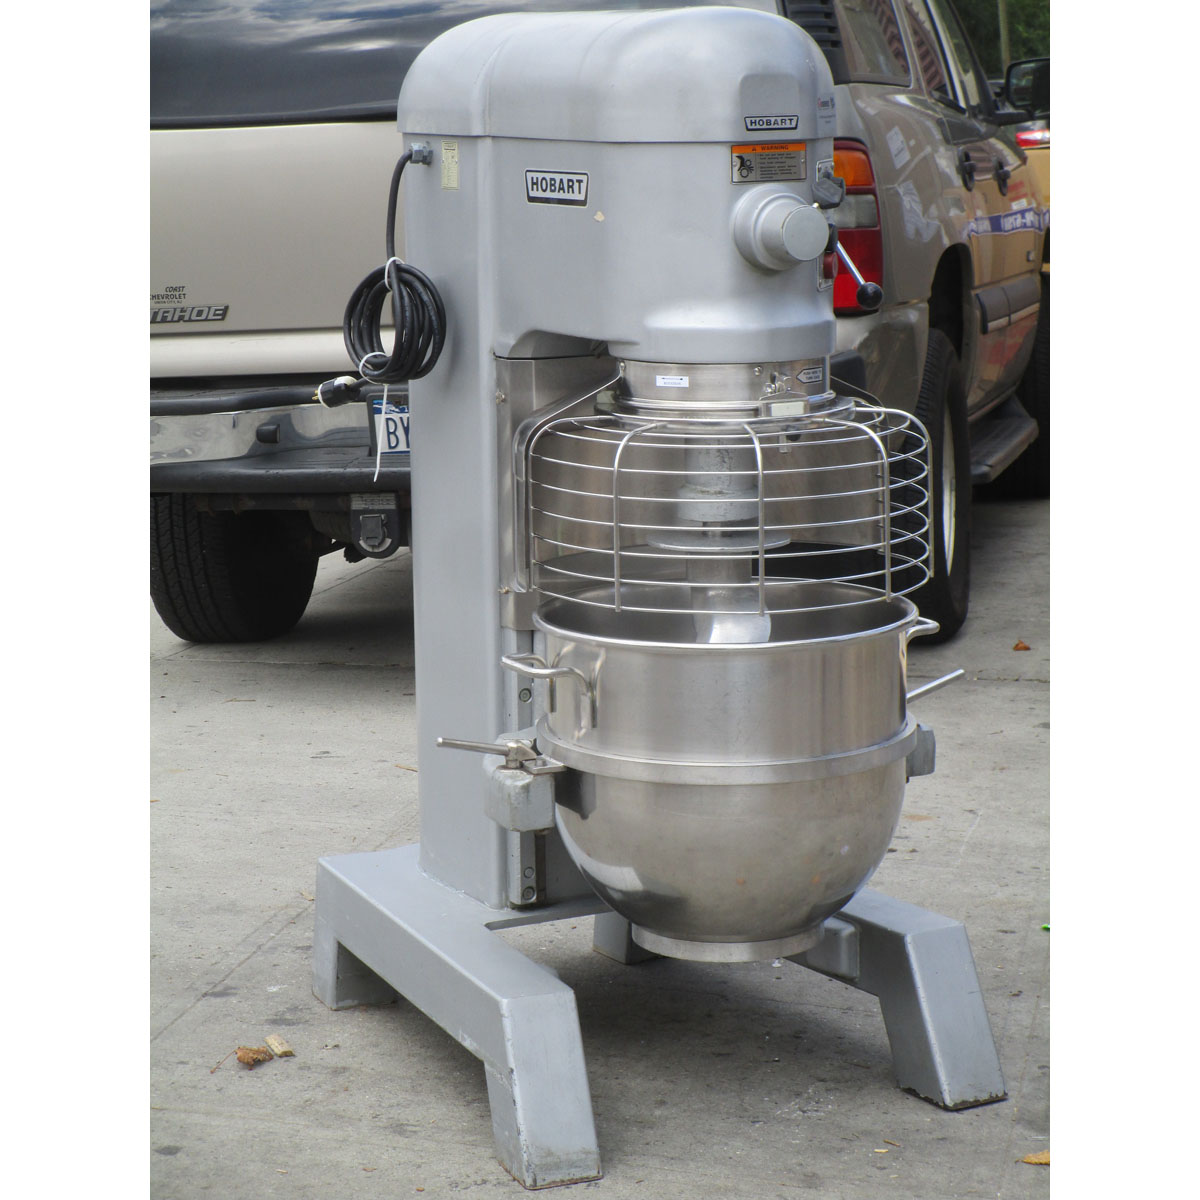 Hoabrt 60 Quart H600 Mixer With Bowl Gaurd, Great Condition image 1